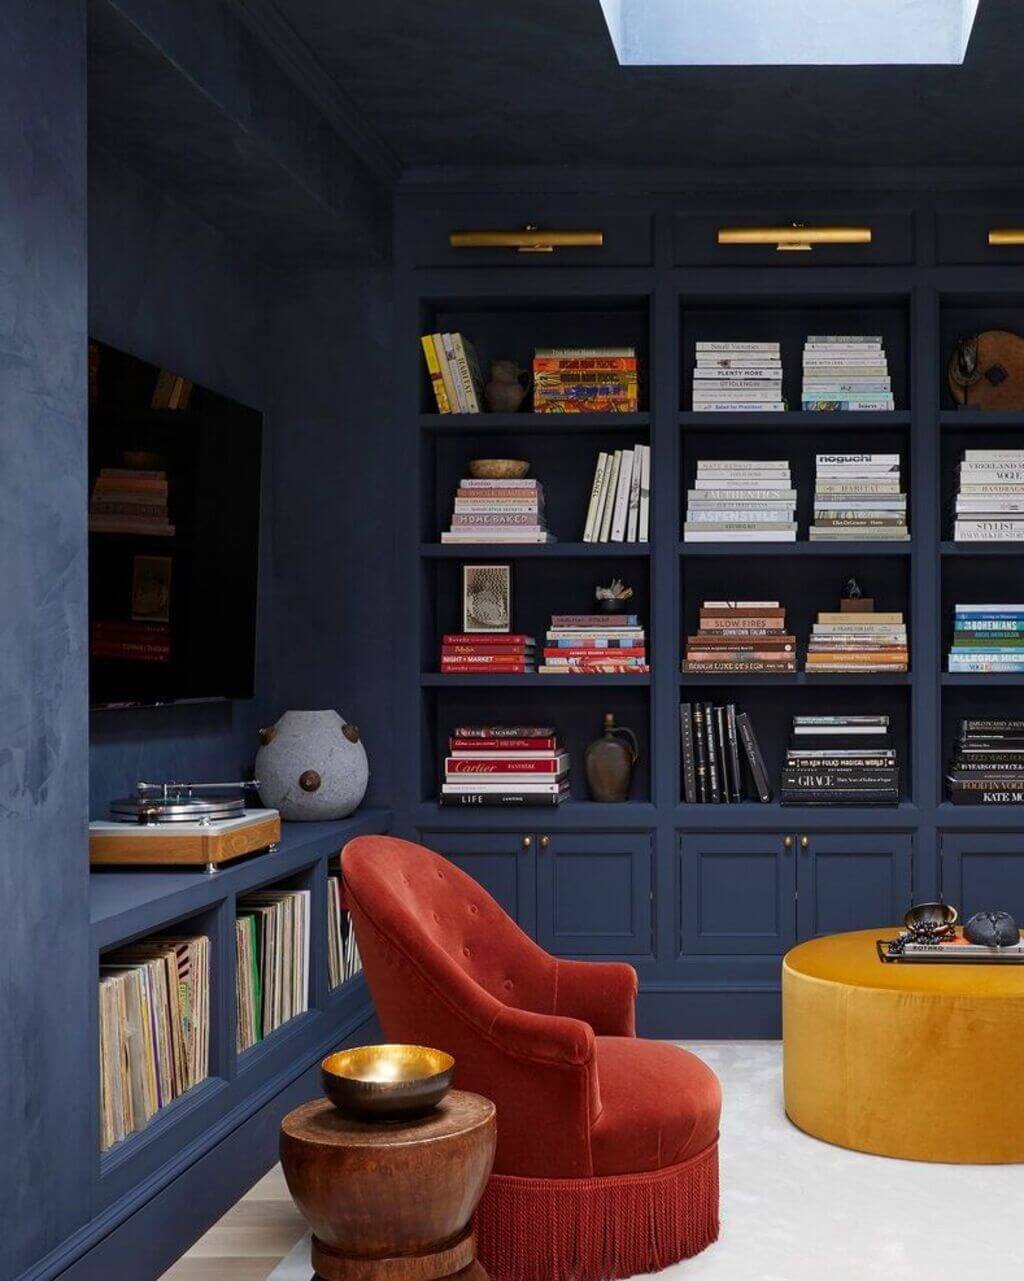 A living room filled with lots of books and furniture
